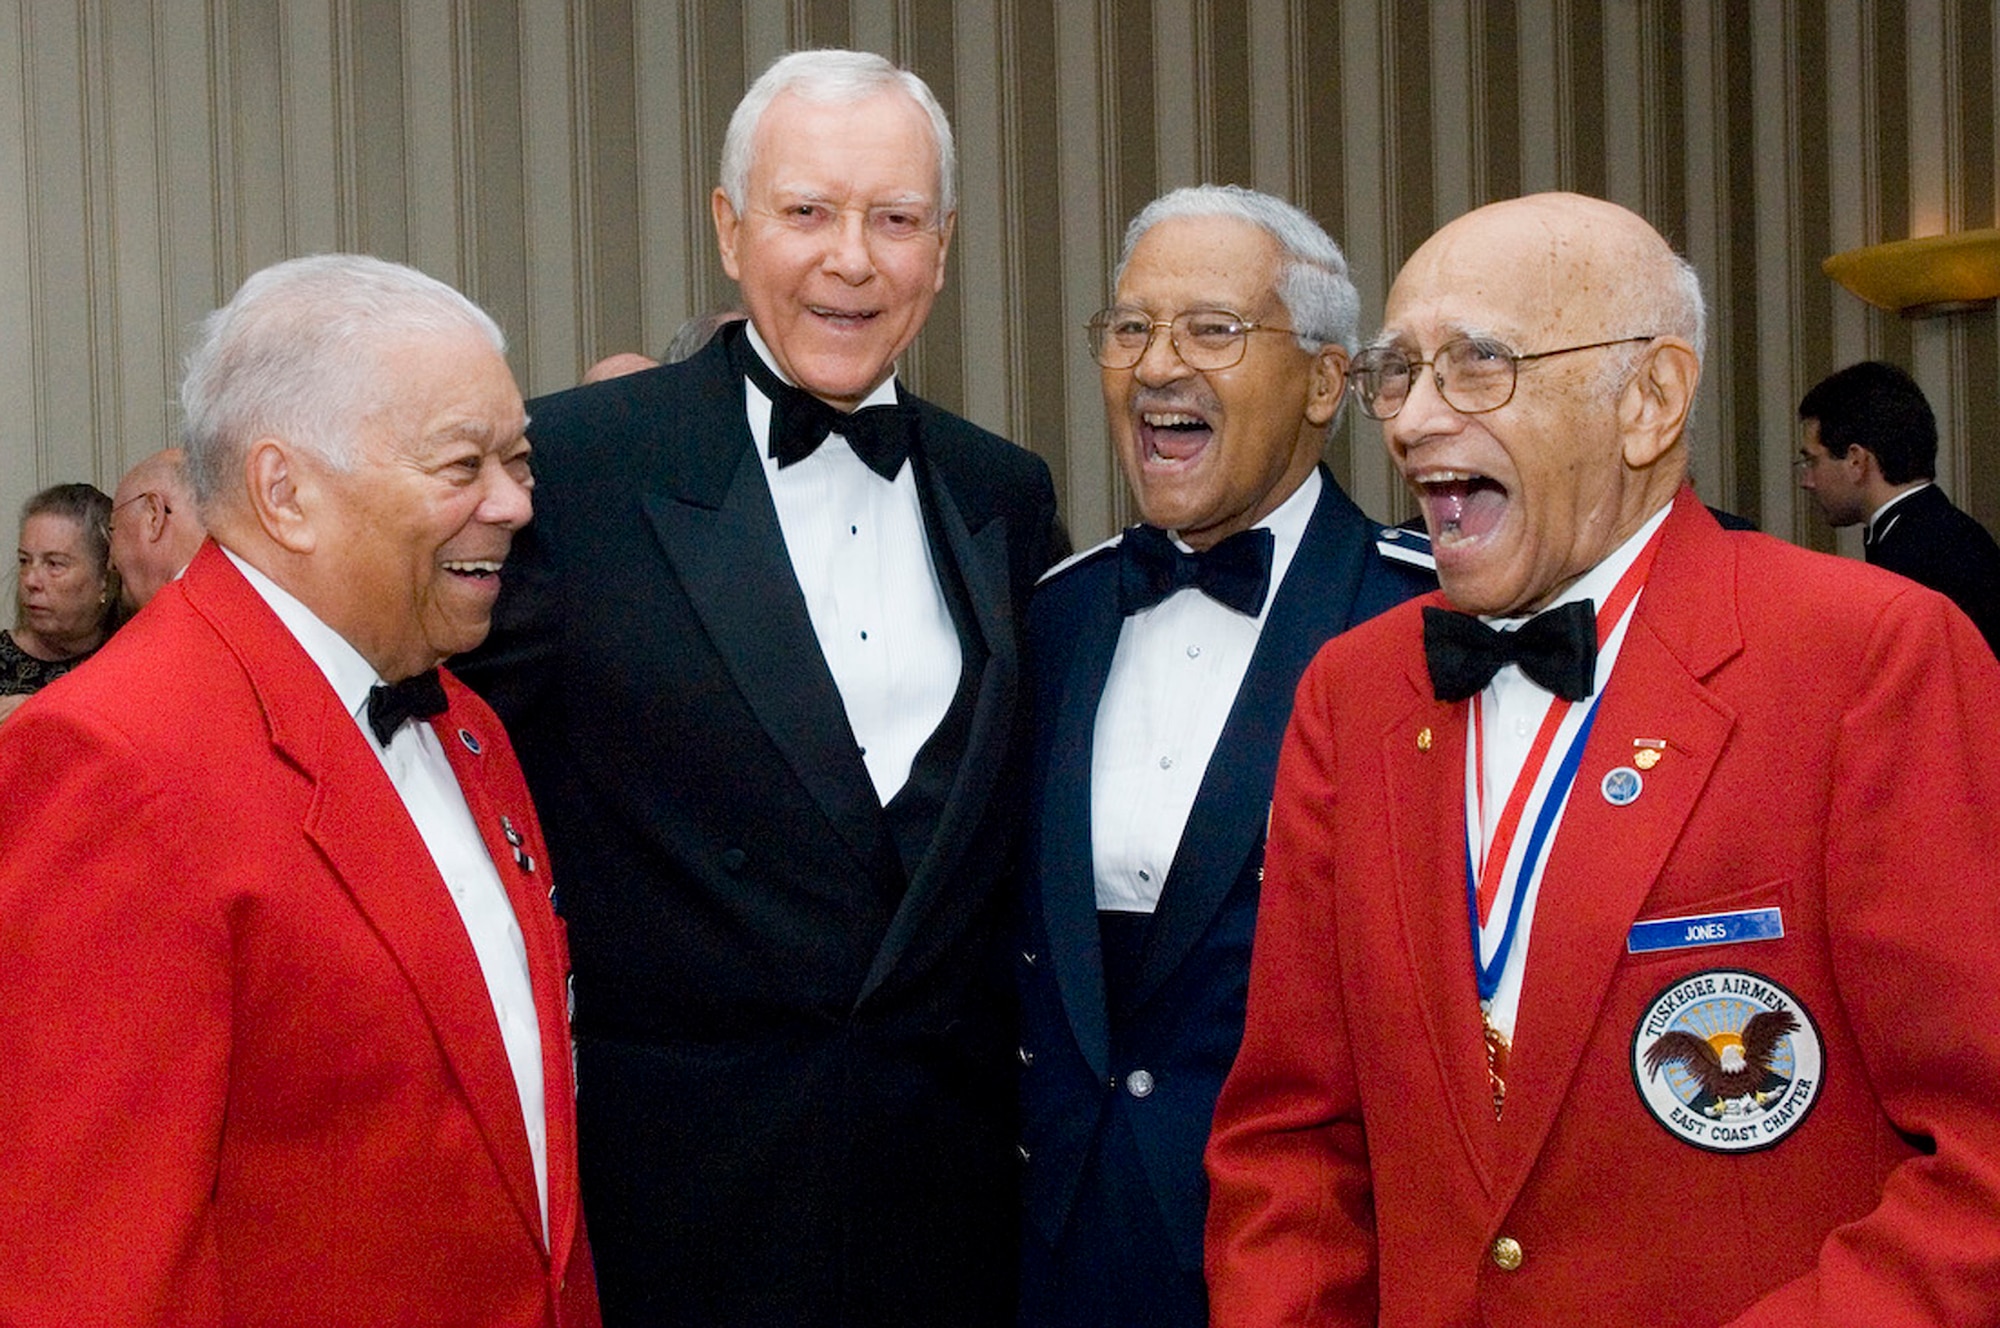 Sen. Orrin Hatch laughs with retired Lt. Col. Walter McCreary, retired Col. Charles McGee and retired Col. Elmer Jones at the Air Force anniversary dinner Sept. 16, 2009, at the Gaylord National Hotel and Convention Center in National Harbor, Md. Senator Hatch is the senator of Utah, and Colonels Jones, McGee and McCreary are members of the Tuskegee Airmen. Senator Hatch received the W. Stuart Symington Award and Tuskegee Airmen were presented a Lifetime Achievement Award. The dinner was the end of the 2009 Air Force Association Air & Space Conference and Technology Exposition. (U.S. Air Force photo/Staff Sgt. Desiree N. Palacios)